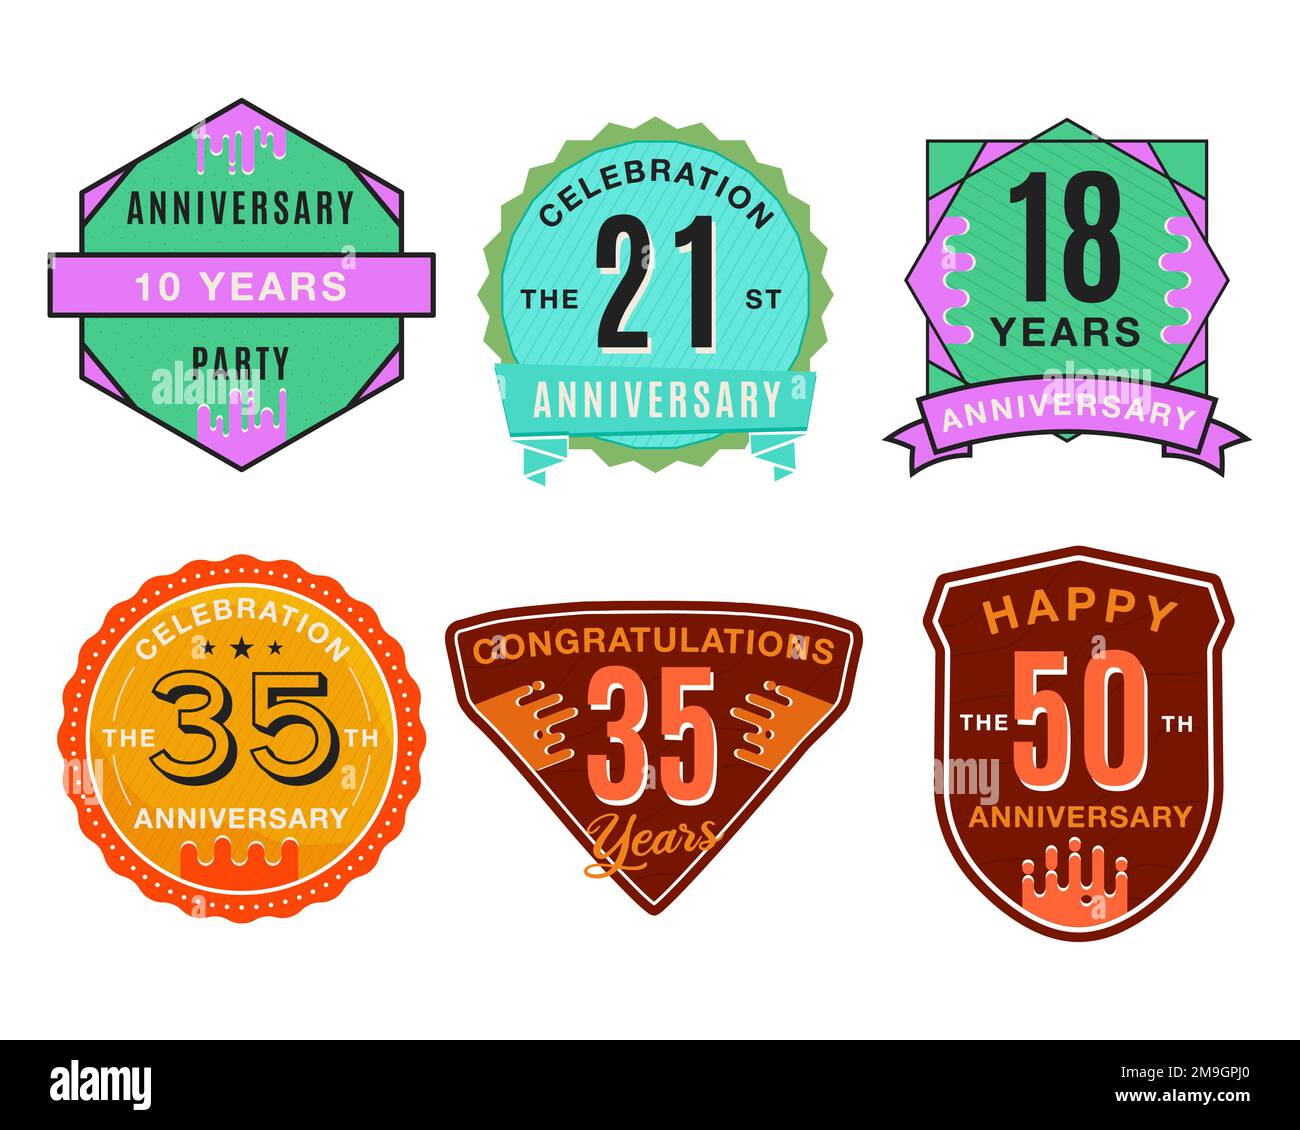 6 Anniversary Logo Templates Set. Wedding badges in flat modern style. Birthday anniversary labels collection. Stock vector designs Stock Vector